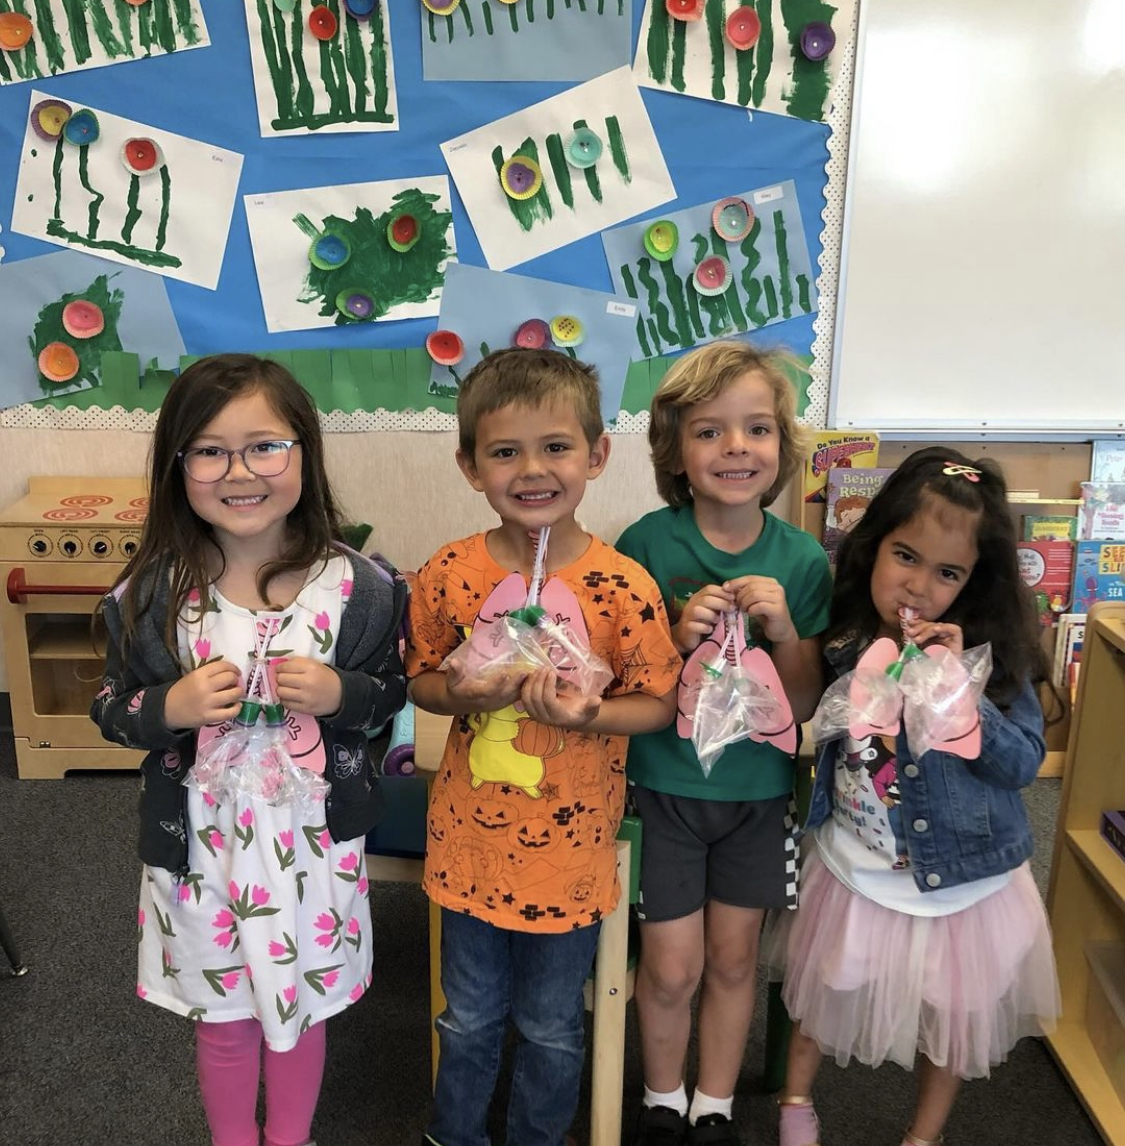 These TK students at Quail Glen are learning about the human body and how we breathe! 
Have you registered your student for TK for the 2024-2025 school year? Enroll today at drycreekschools.us. We invite you to come learn with us! #DCJESDPROUD #Transitionalkindergarten